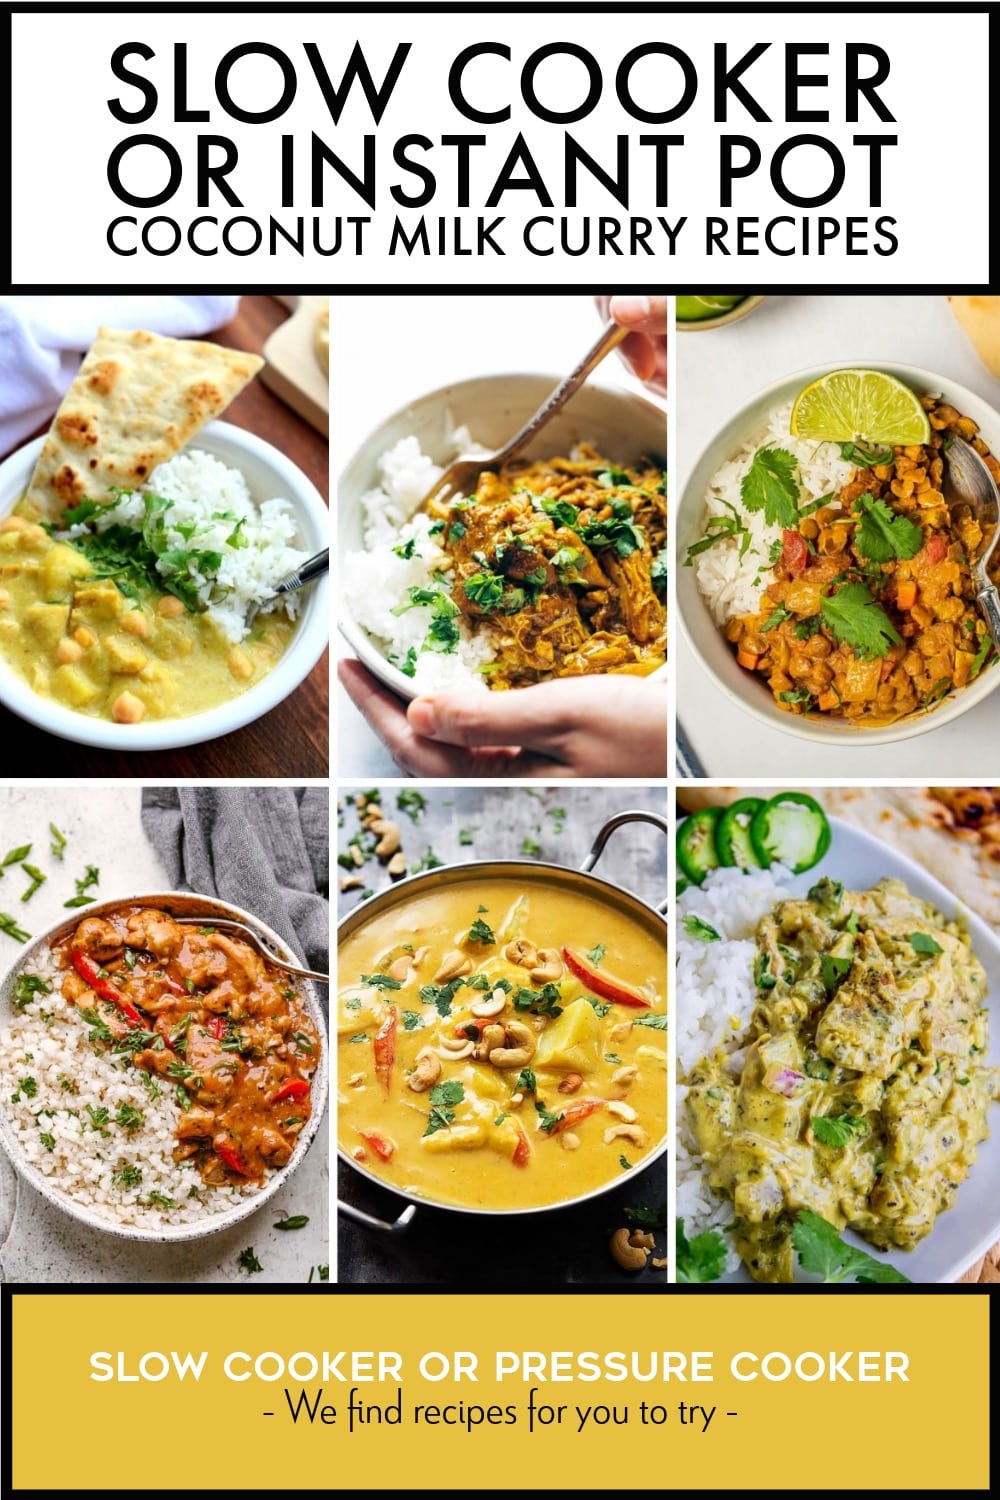 Pinterest image of Slow Cooker or Instant Pot Coconut Milk Curry Recipes